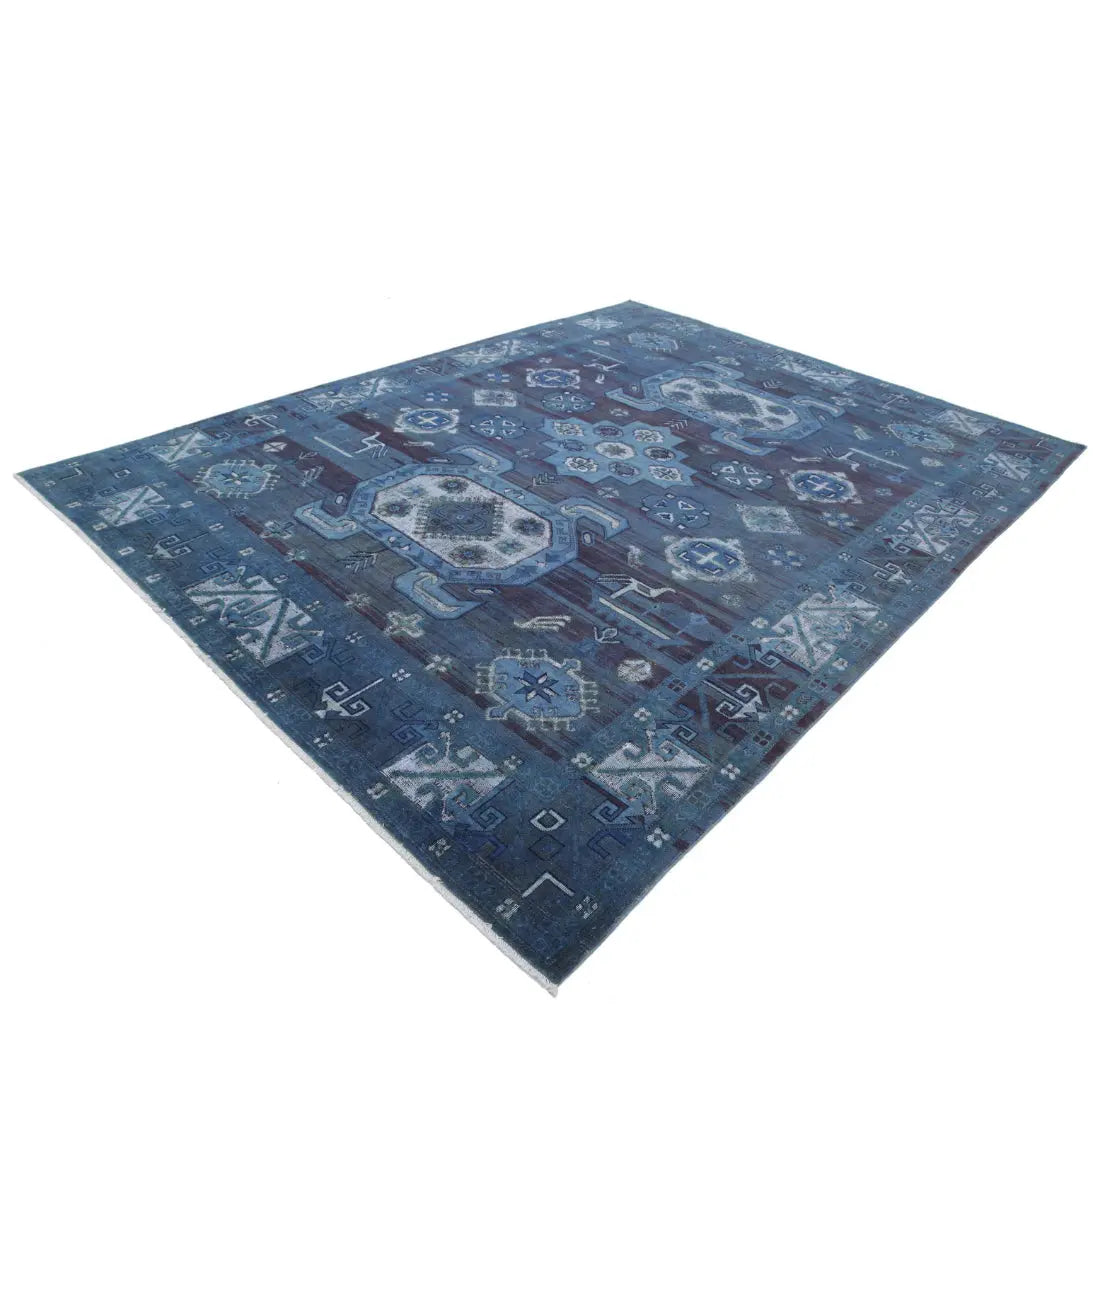 Hand Knotted Onyx Wool Rug - 8'7'' x 11'7''